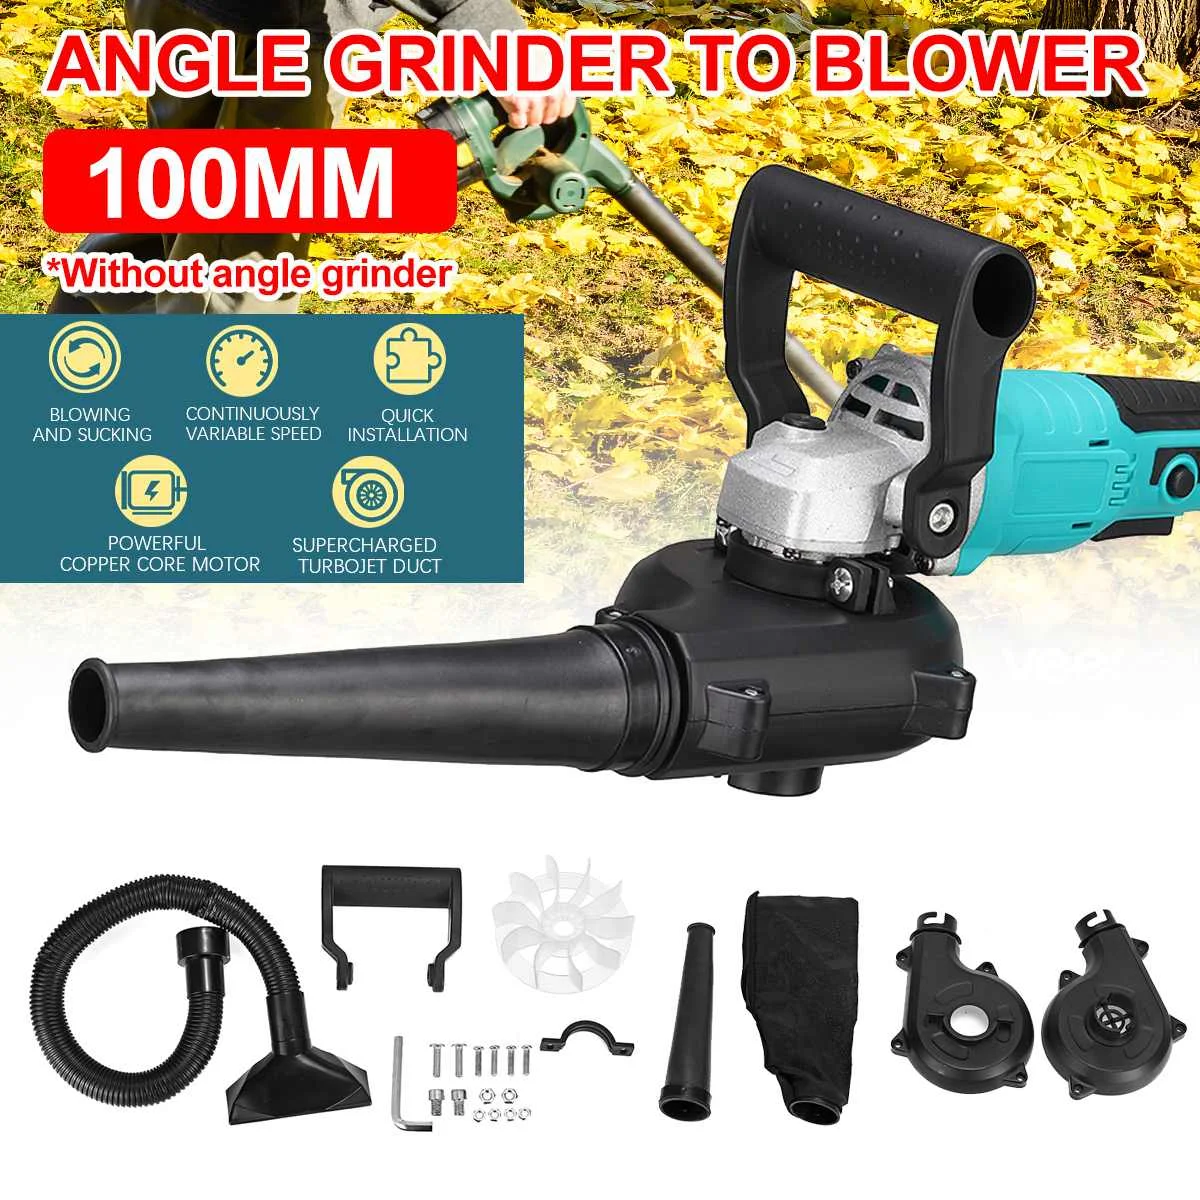 

Super Wind Dust Blower Accessory Grinder Air Blower Dust Blowing Bracket Change 100 Angle Grinder Into Blower DIY Home Tool